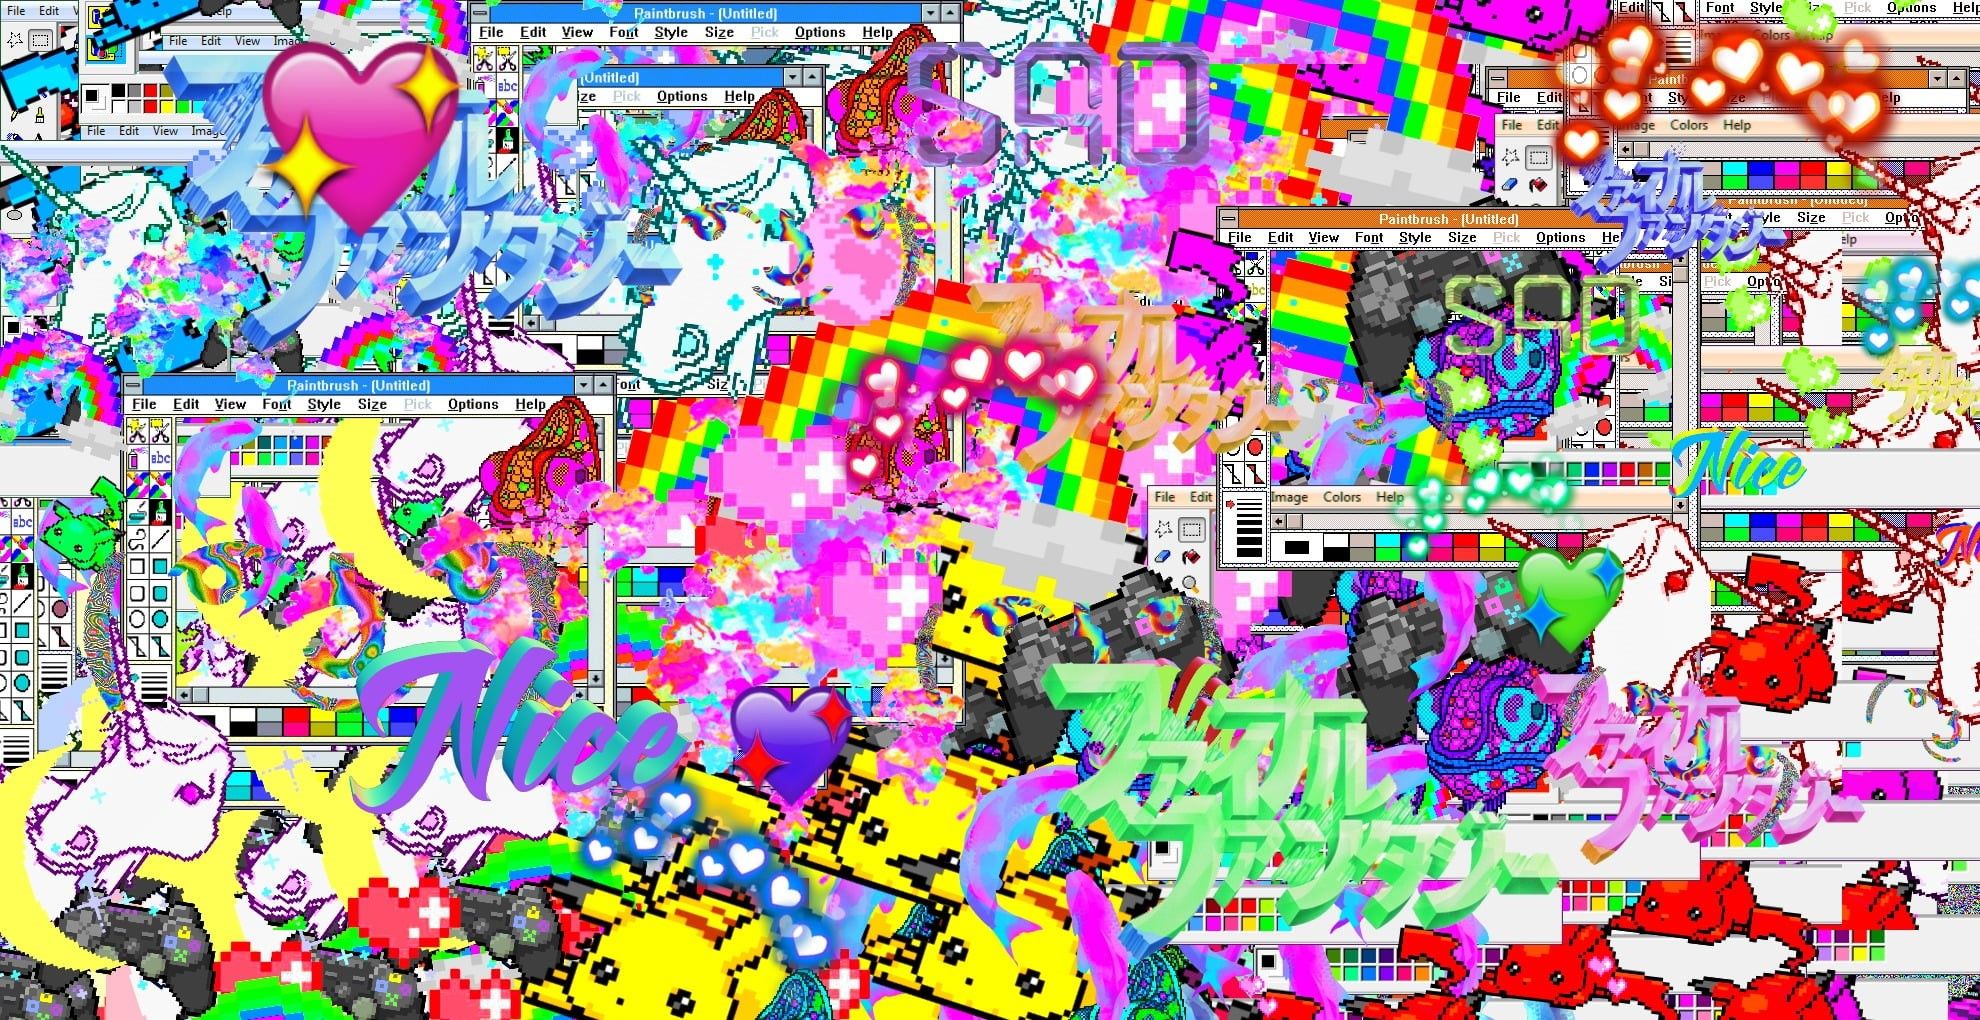 A colorful collage of unicorns, hearts, and Chinese characters. - Glitchcore